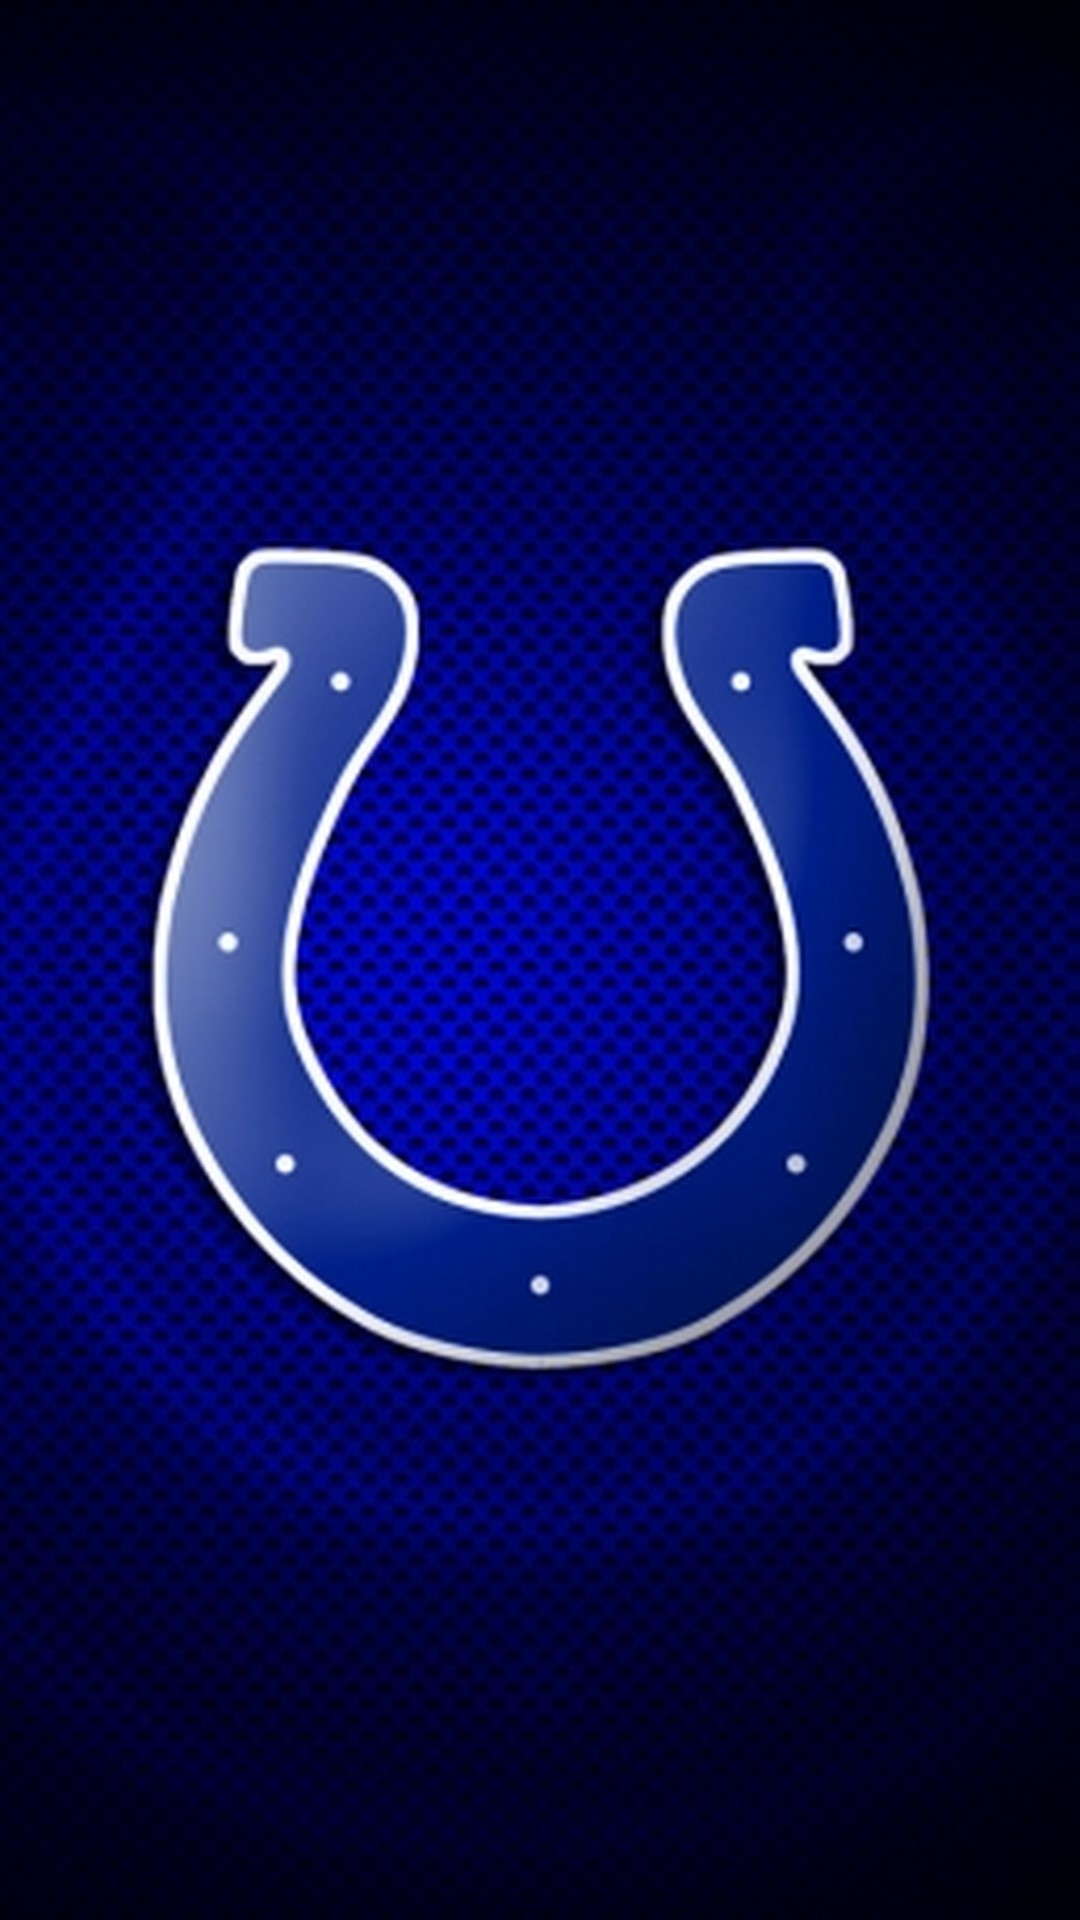 Indianapolis Colts iPhone Wallpaper New with high-resolution 1080x1920 pixel. Donwload and set as wallpaper for your iPhone X, iPhone XS home screen backgrounds, XS Max, XR, iPhone8 lock screen wallpaper, iPhone 7, 6, SE and other mobile devices